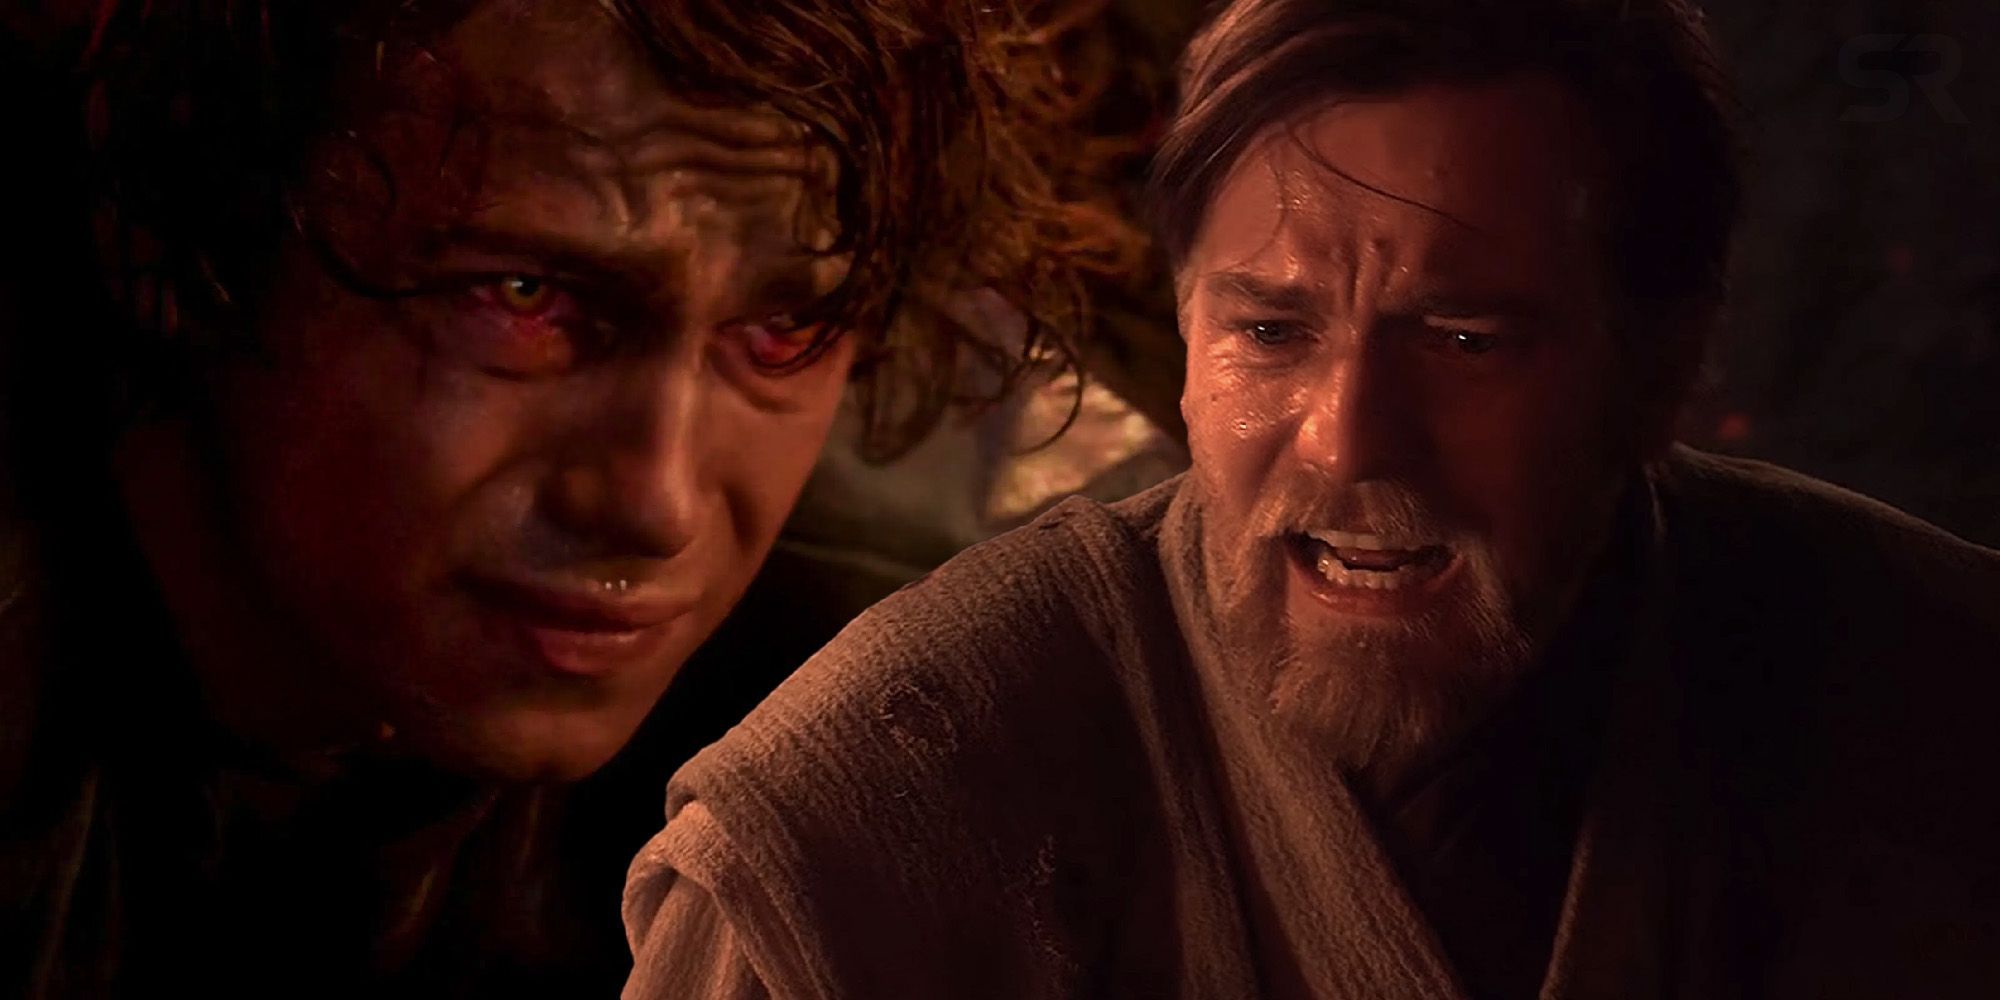 Viaje montaje movimiento Screen Rant on Twitter: "Knowing that Anakin Skywalker had turned to the  dark side in Revenge of the Sith, why didn't Obi-Wan Kenobi decide to end  him in Mustafar? #StarWars https://t.co/46E5a3hjcD https://t.co/UwAX9BTMZy"  /